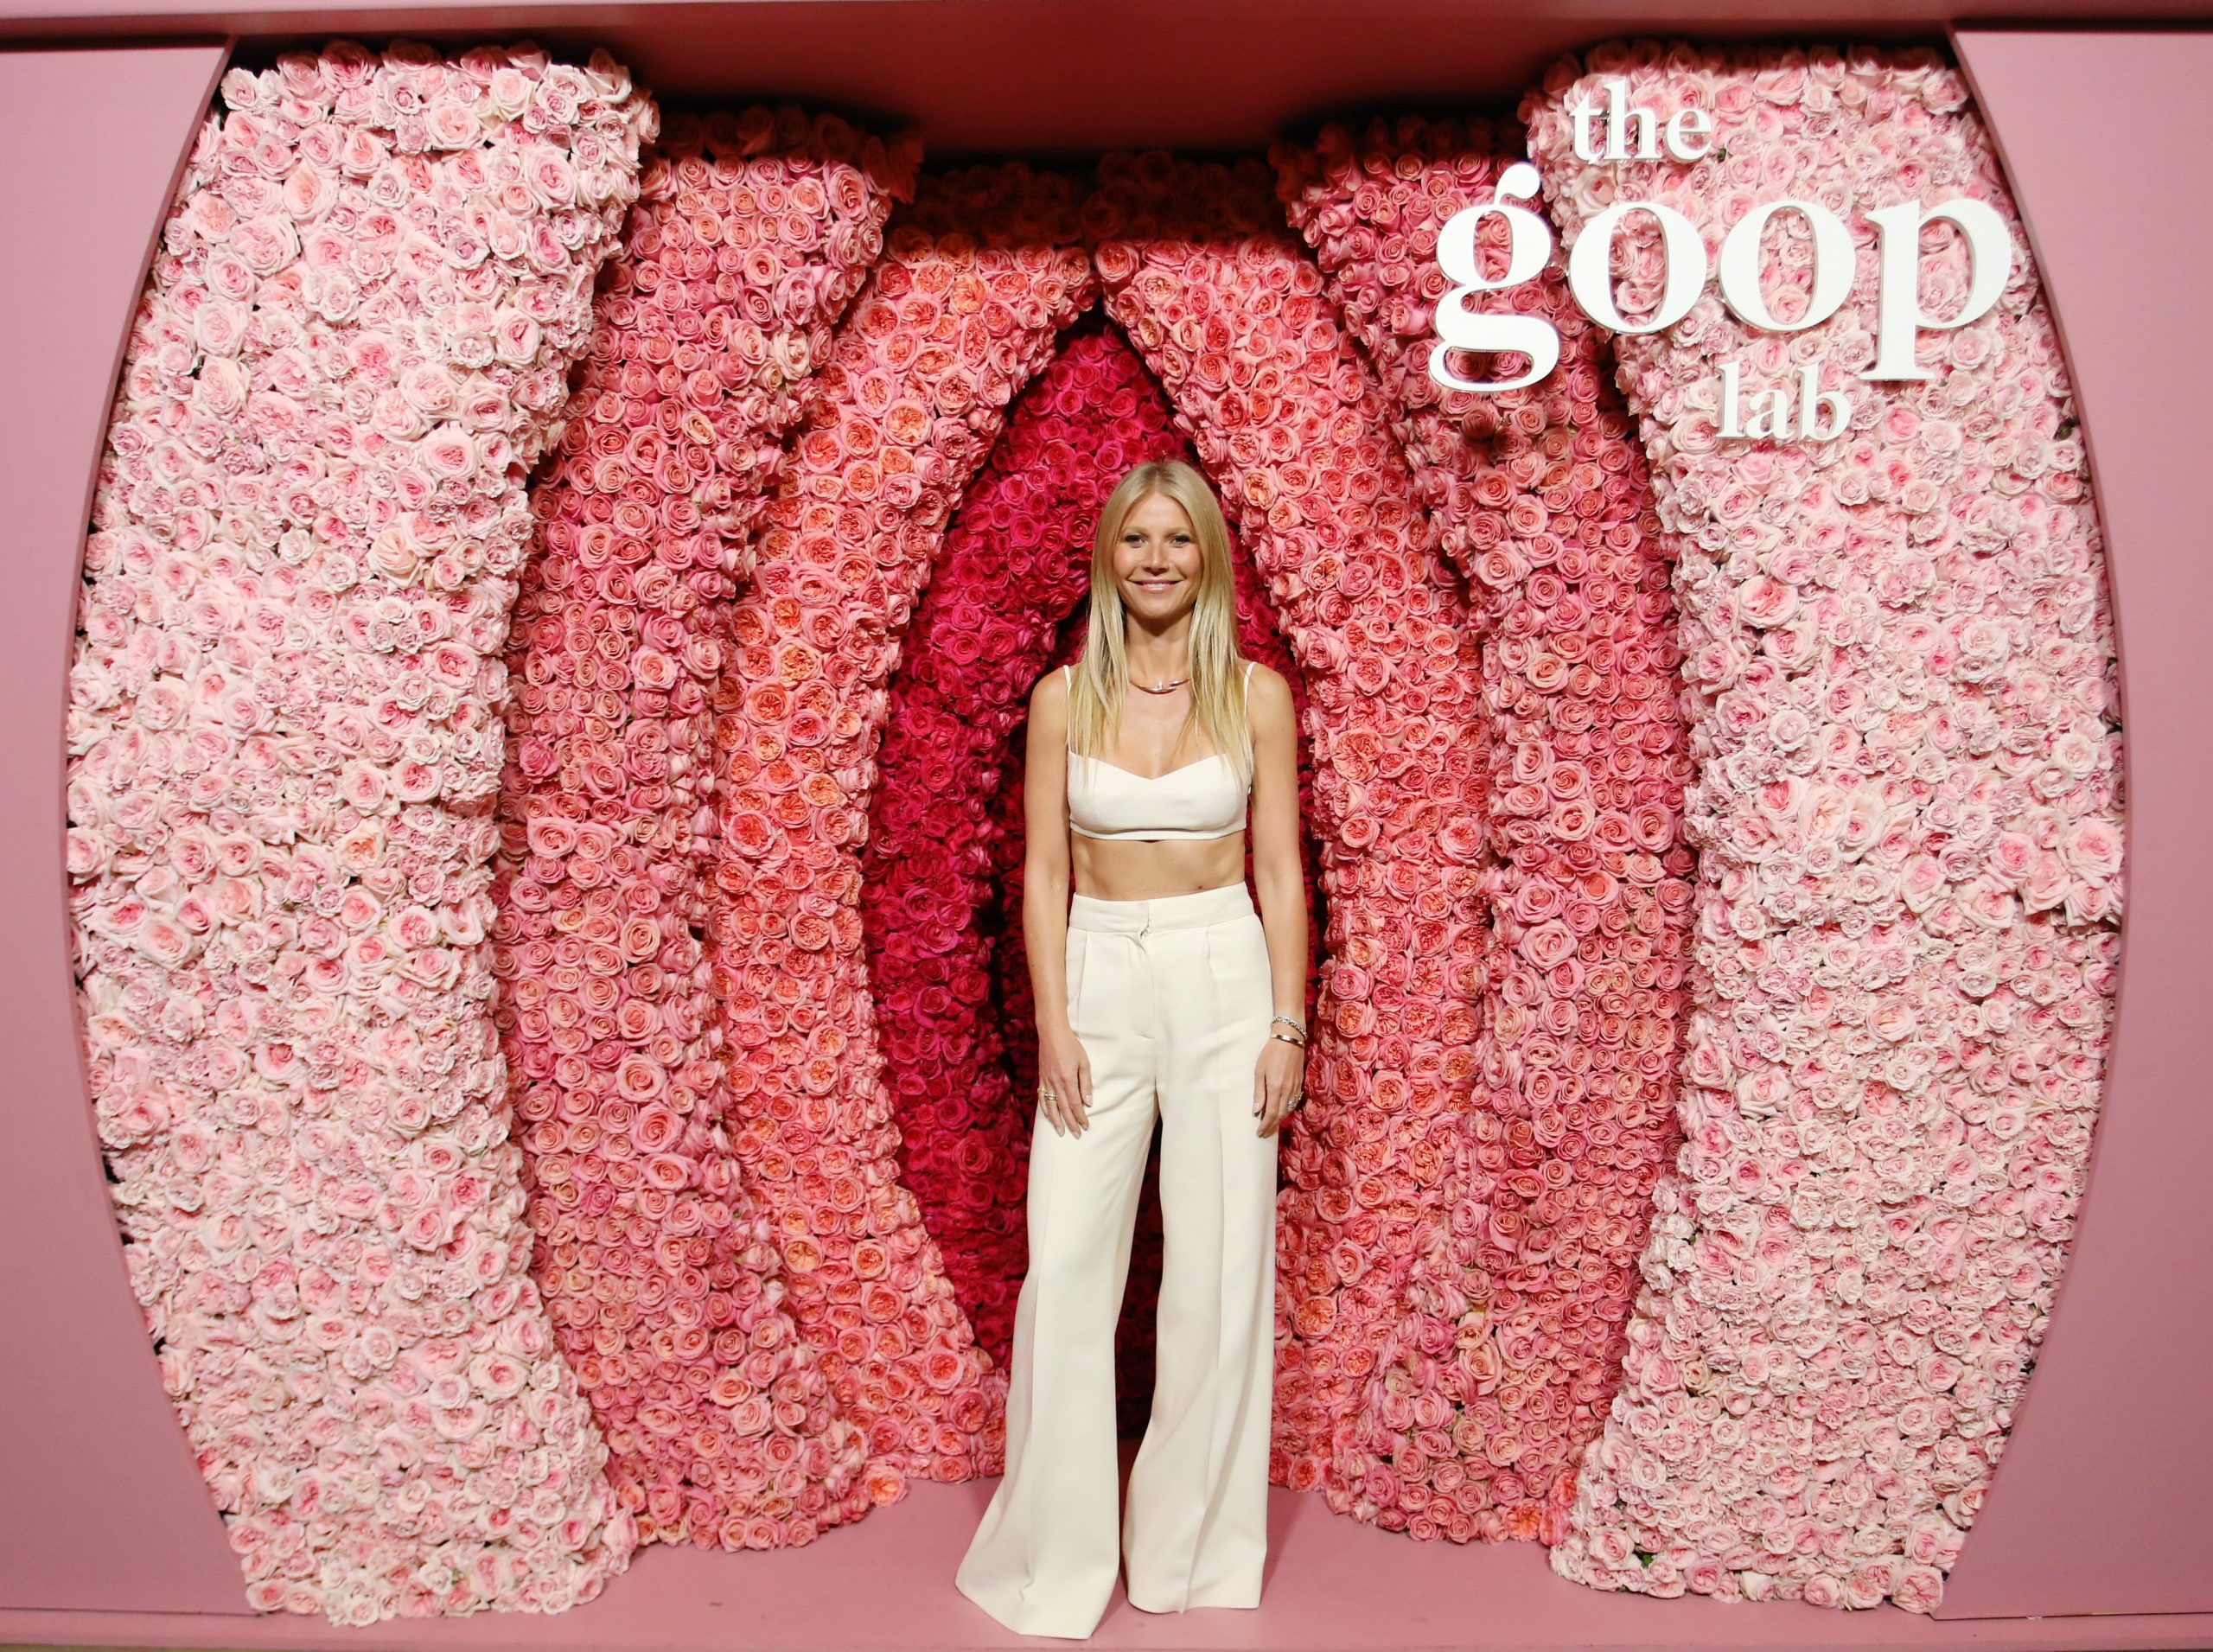 Gwyneth Paltrow to Host First Goop Cruise This Summer